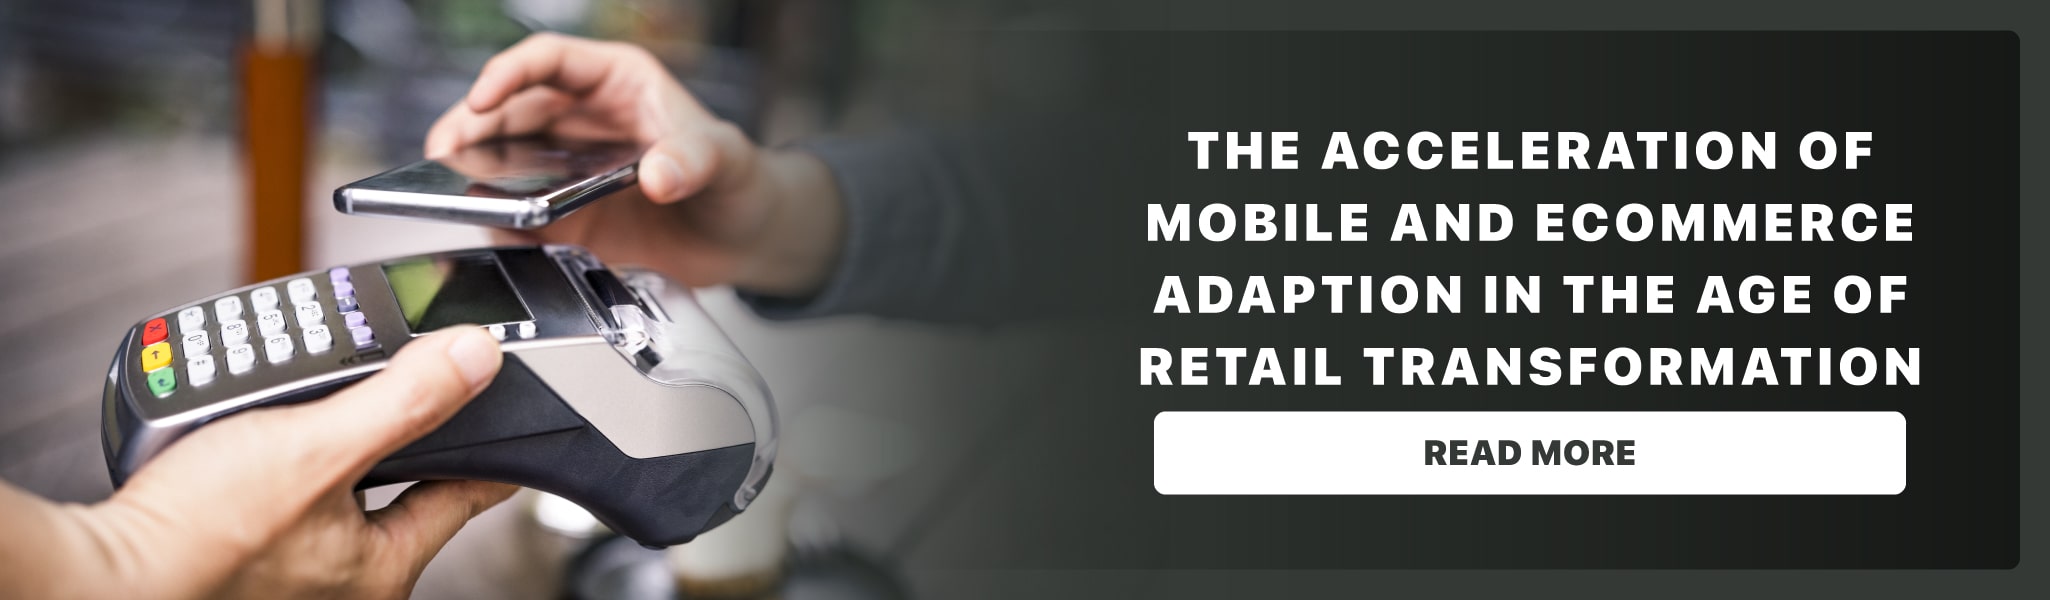 The Acceleration of Mobile and eCommerce Adaption in the Age of Retail Transformation